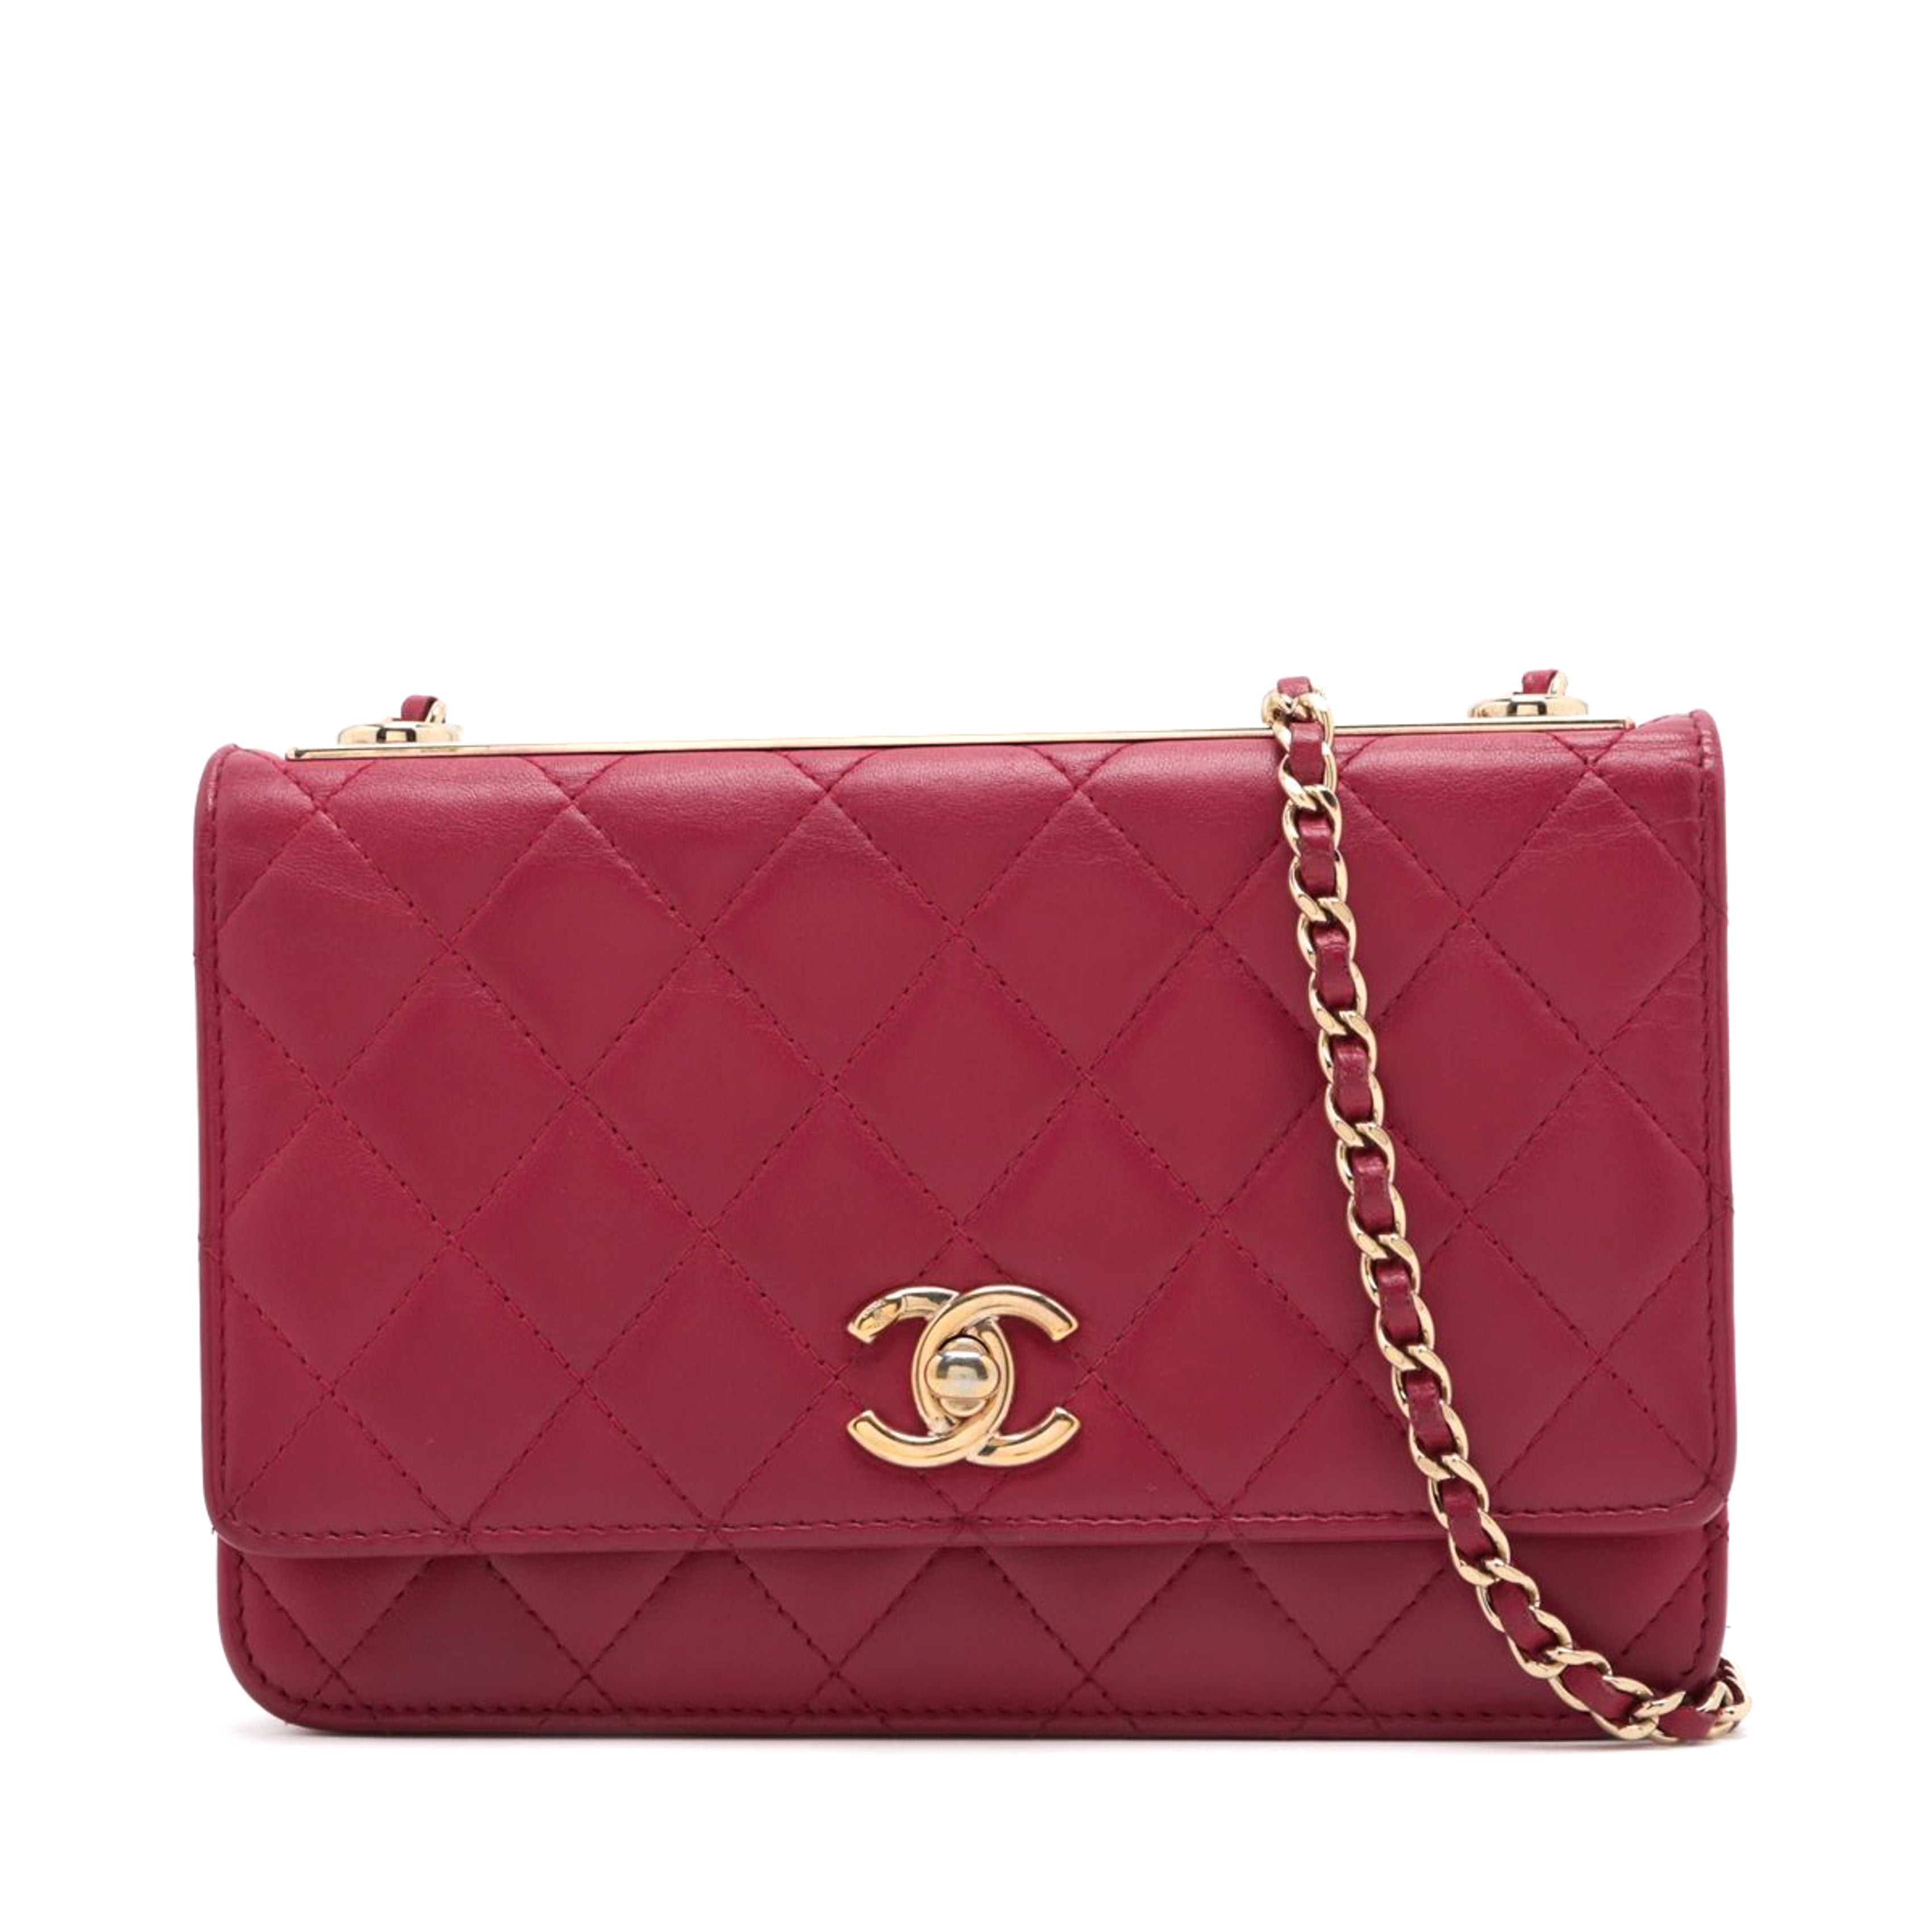 CHANEL Chanel Quilted Trendy CC Wallet On Chain in Bordeaux - Vault 55